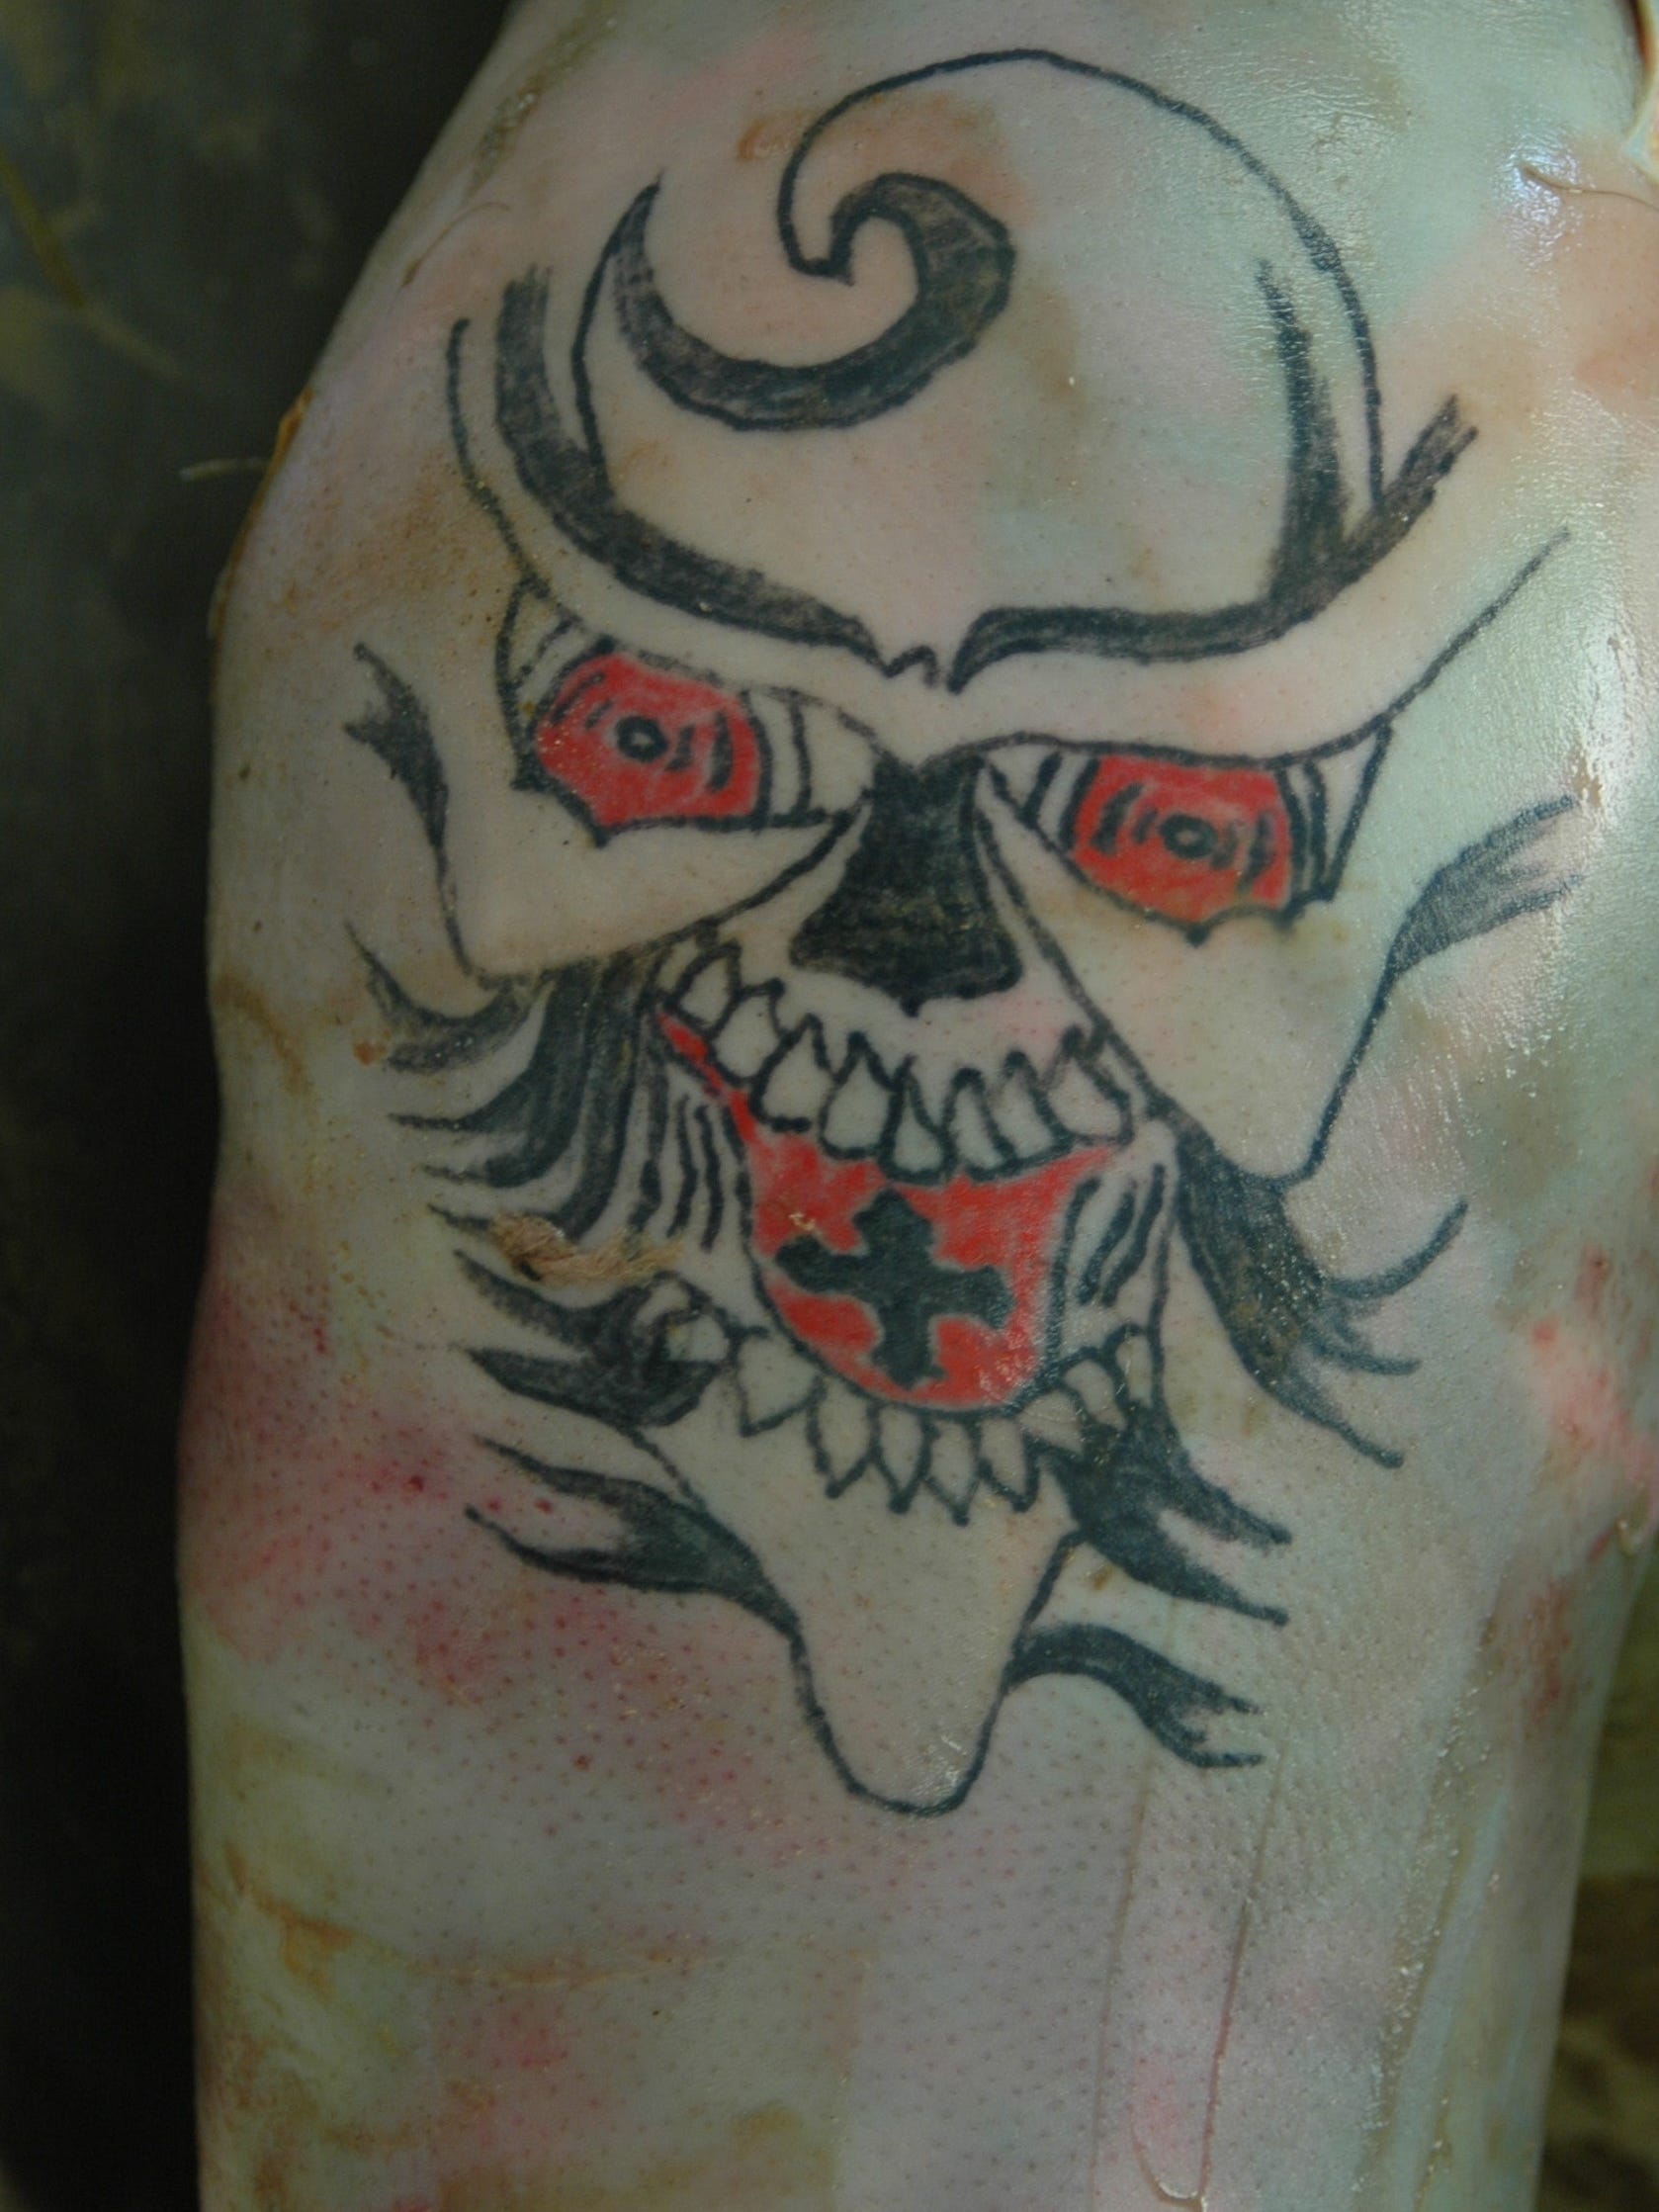 This tattoo was photographed on the body of a deceased migrant who was found floating in the All-American Canal on Jan. 24, 2007. Photo from case number 07-017.